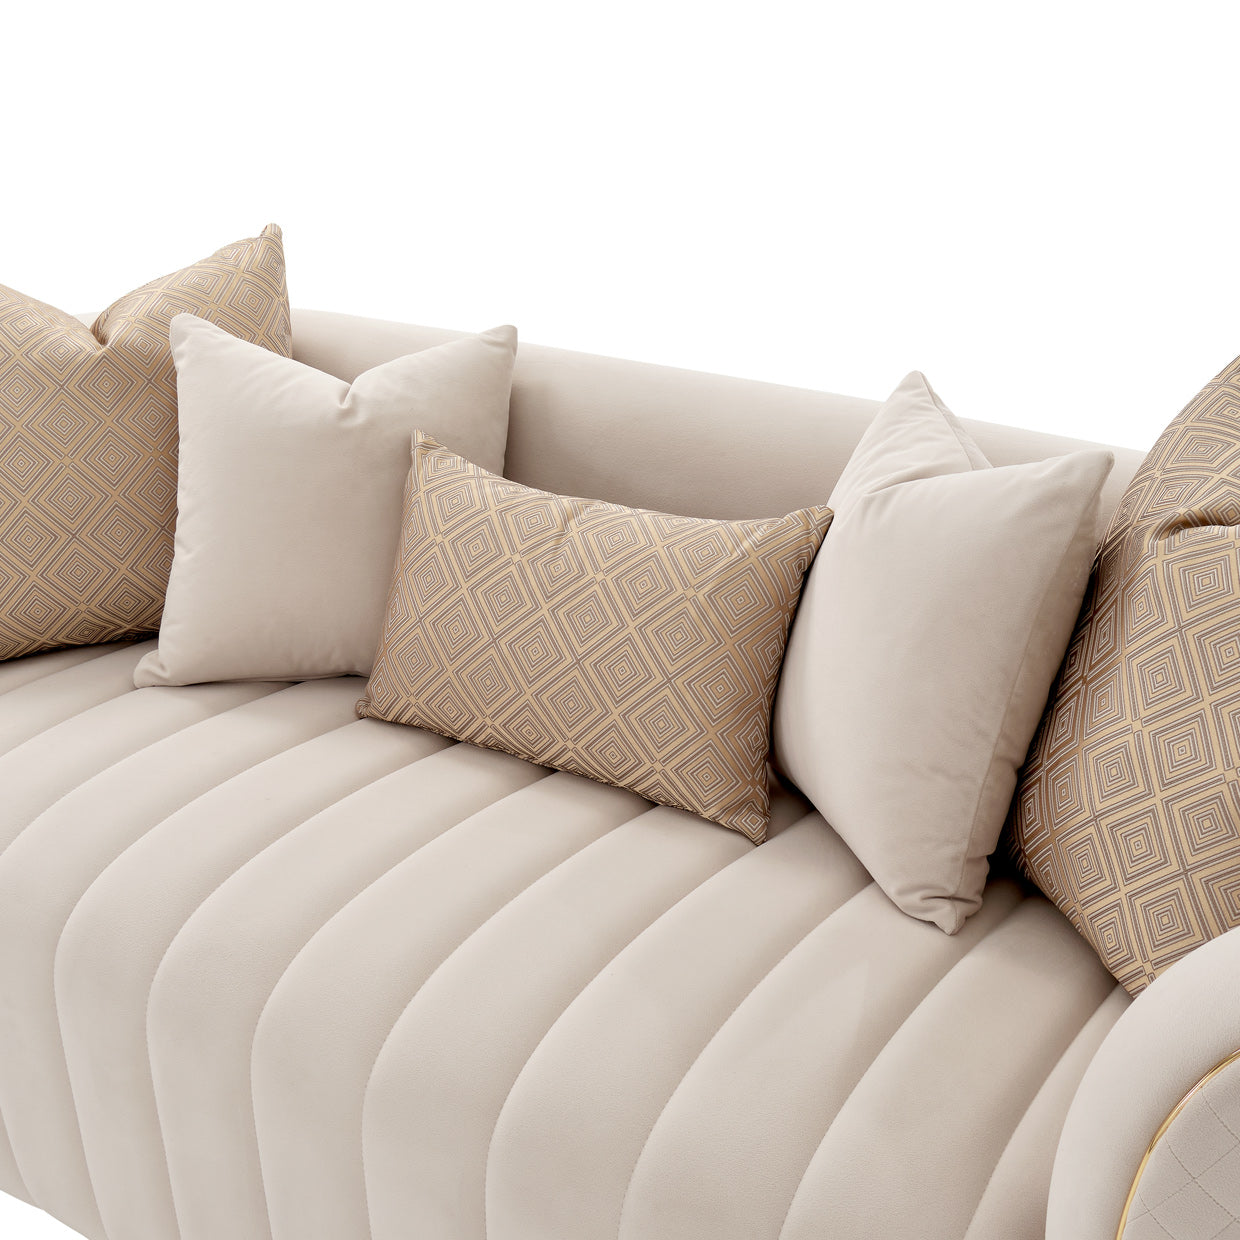 Ariana loveseat, Intimate luxury, Exquisite accent pillows, Gold jacquard, Velvety beige, plushness, Oblong centerpiece, Personal seating experience, Quiet evenings, Heartfelt, conversations, michael amini, Loveseat, Beige,  Gold, dream art , pillow